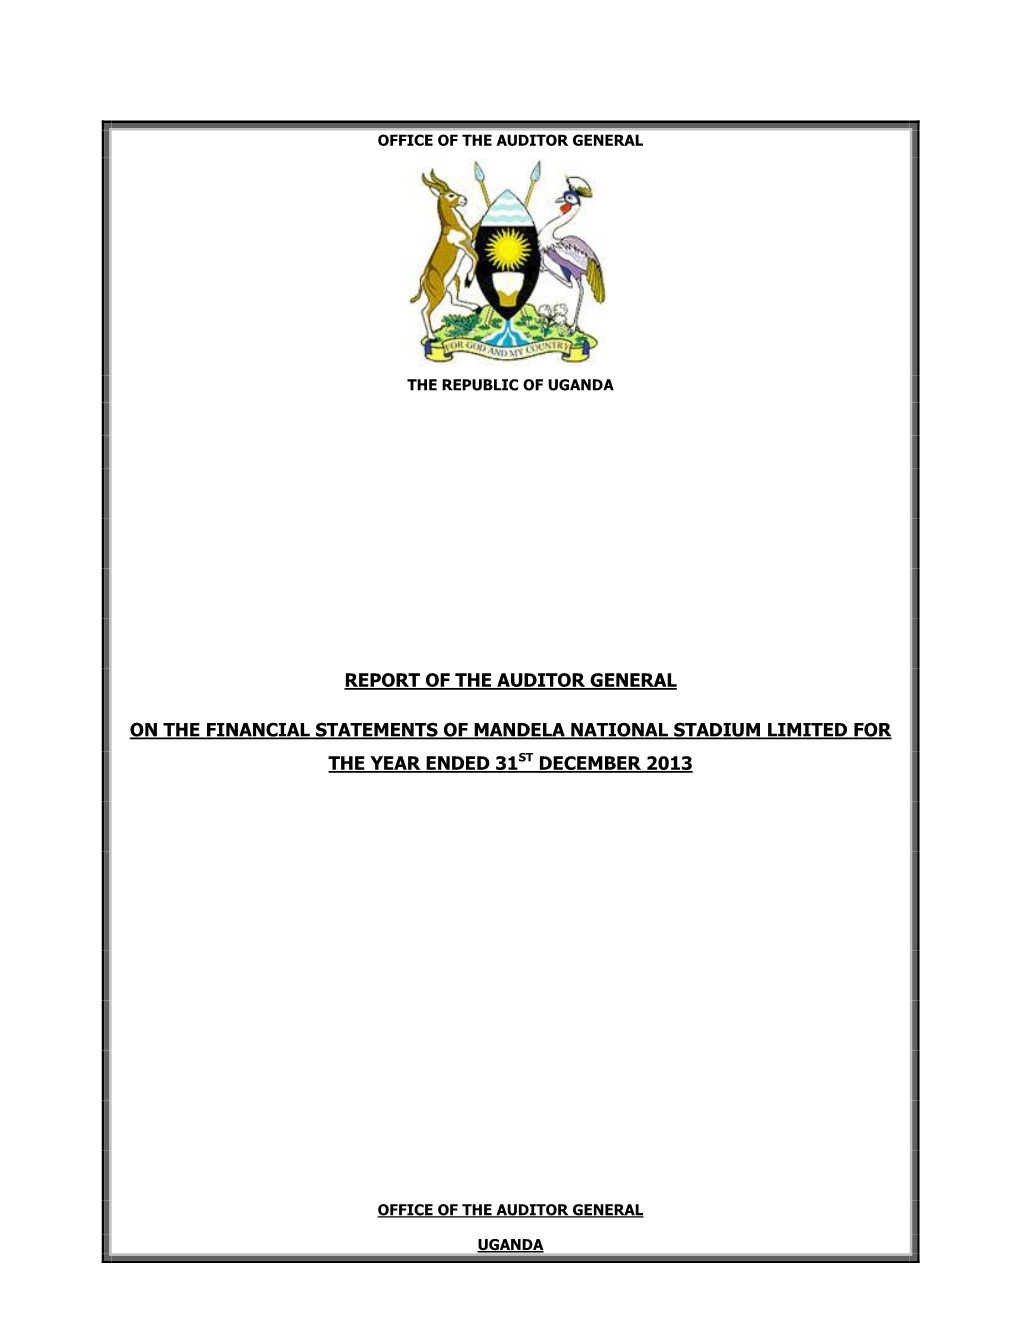 Report of the Auditor General on the Financial Statements of Mandela National Stadium Limited for the Year Ended 31St December 2013